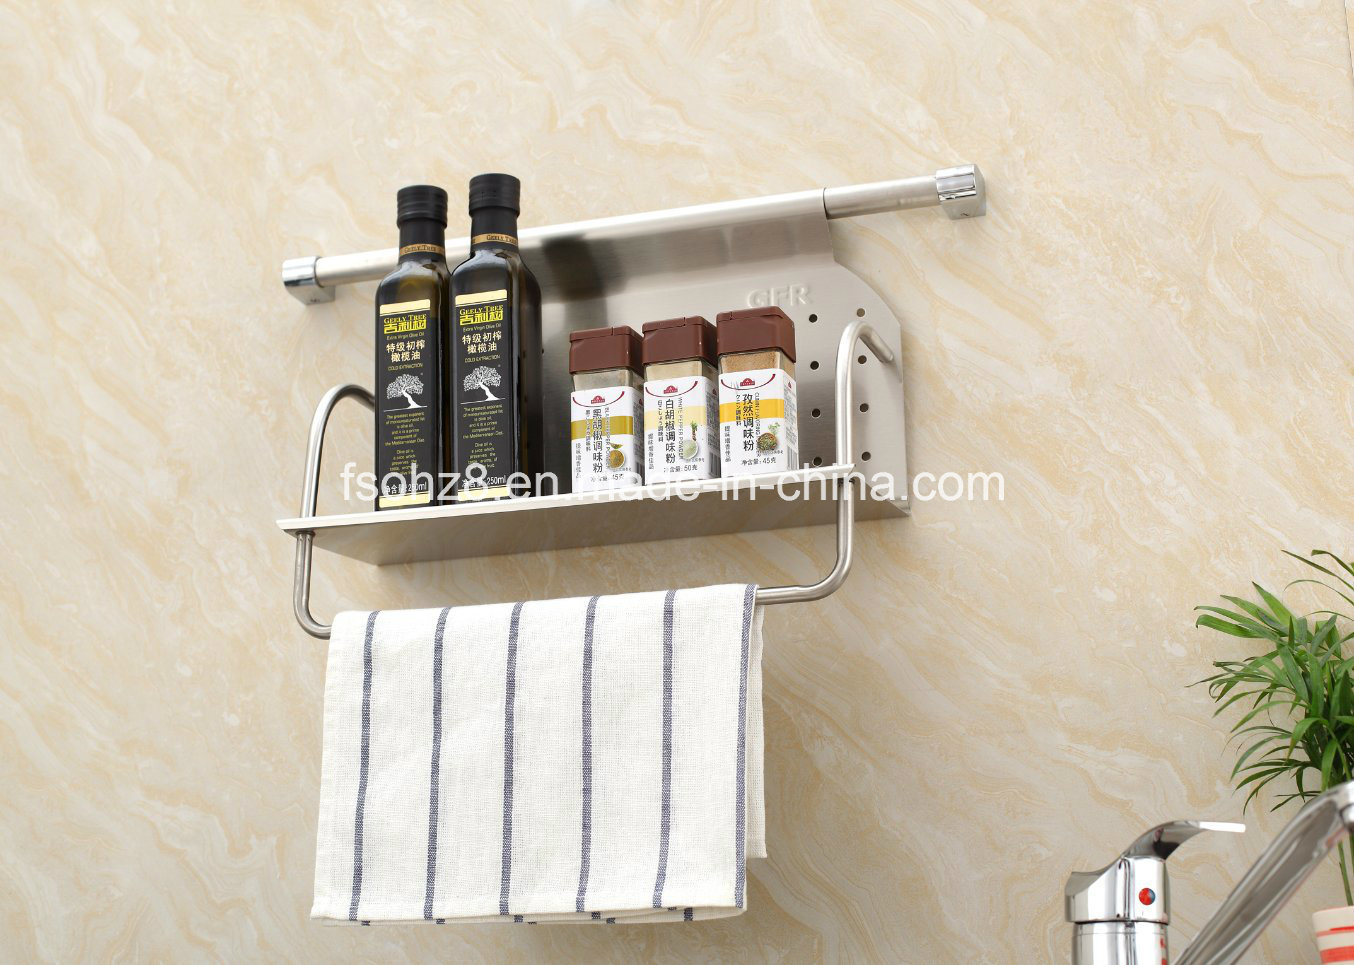 Wall Hanging Stainless Steel Kitchent Single Layer Holder with Towel Rack Gfr-310